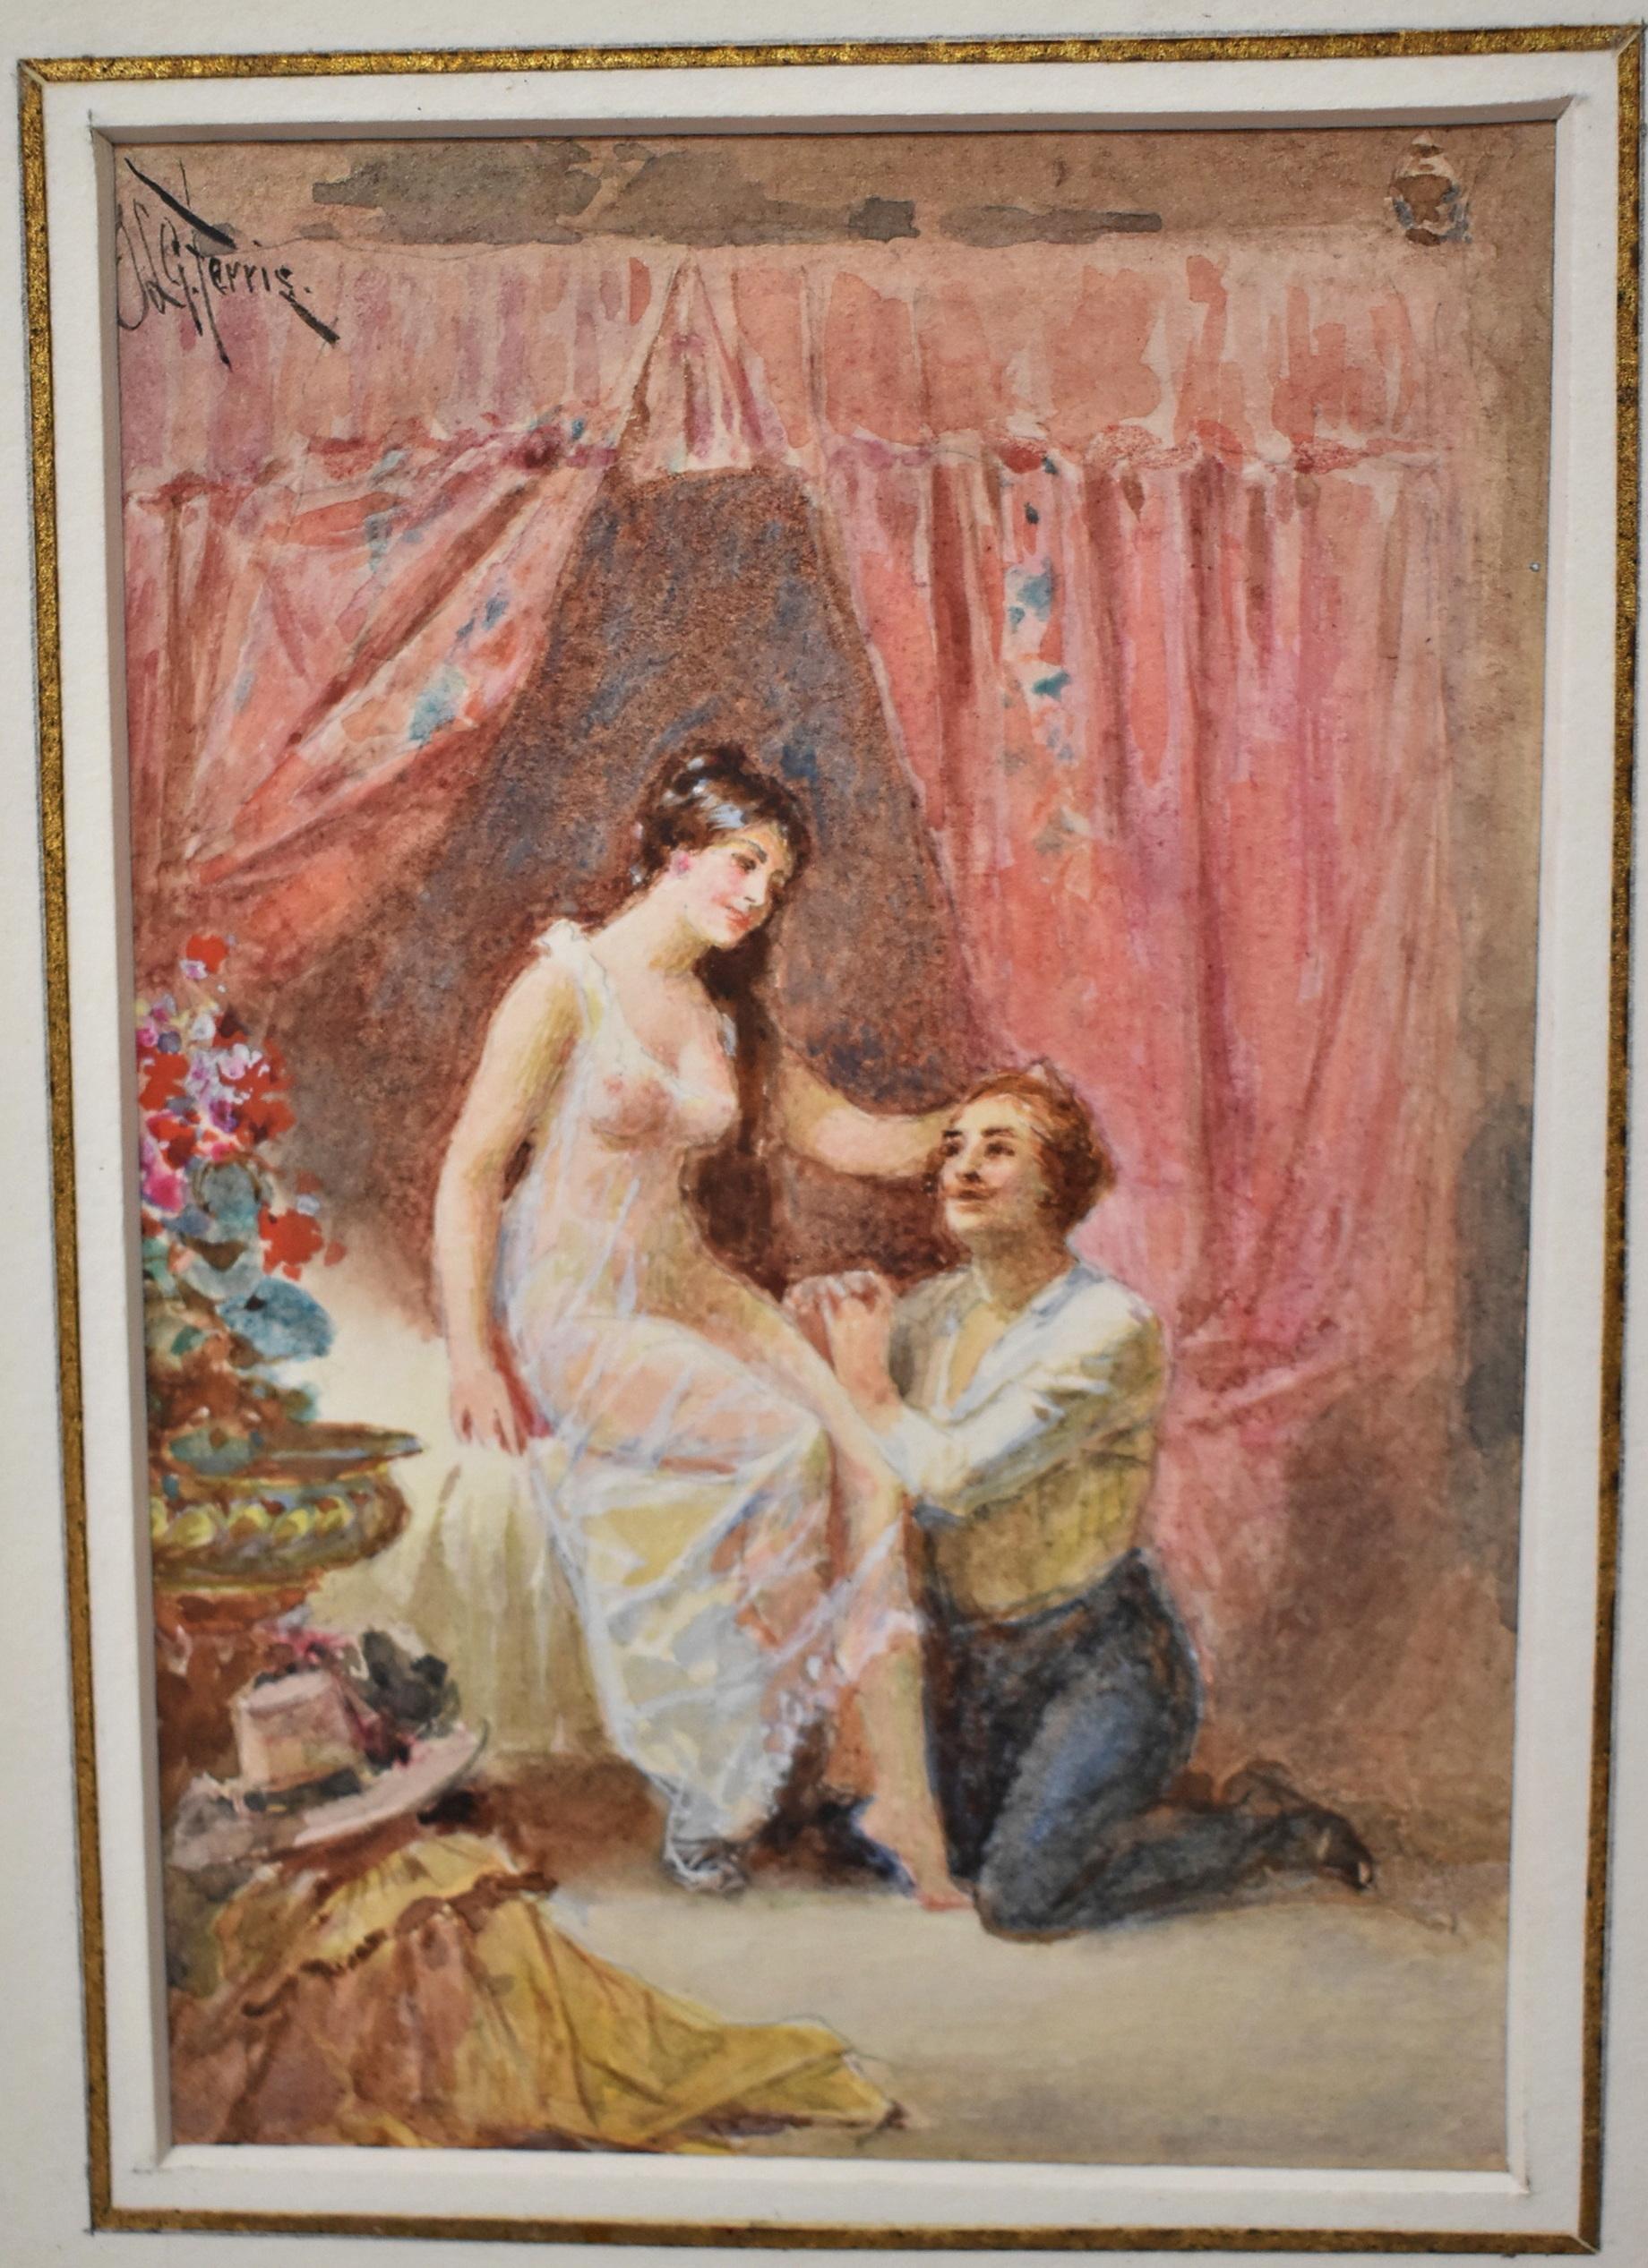 Jean Leon Gerome Ferris Framed Watercolor Painting. Jean Leon Gerome Ferris (1863-1930) was a painter from Philadelphia, PA. This Watercolor depicts a lady sitting on a bed with her lover kneeling by her side. It is framed in a gold frame with a